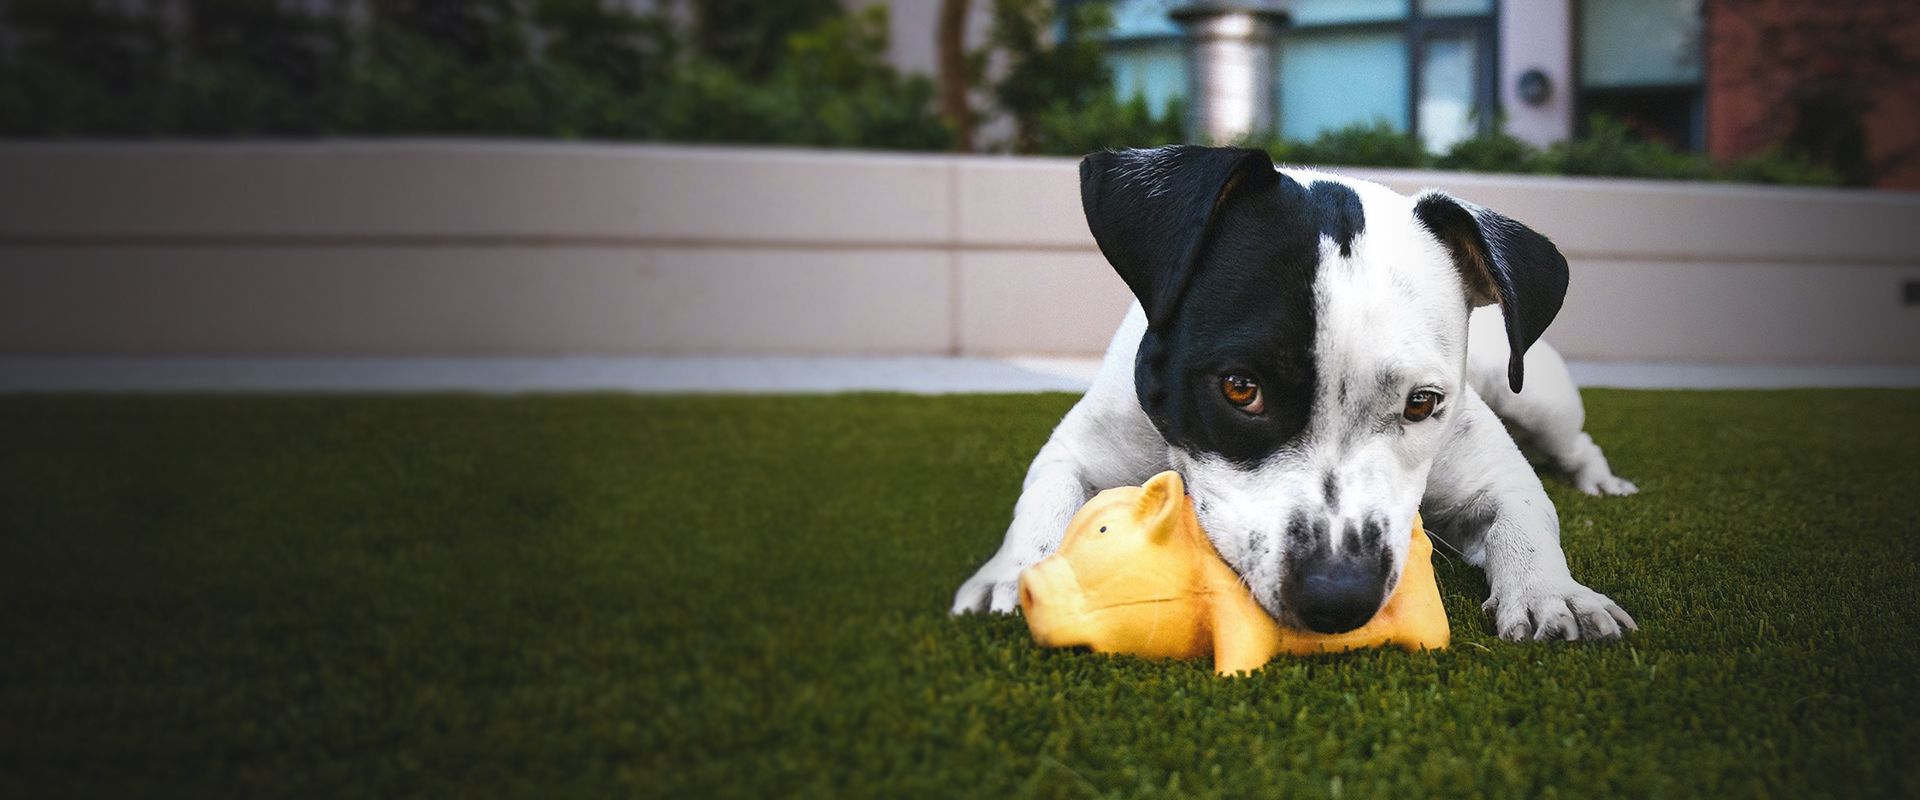 black and white dog chewing a toy